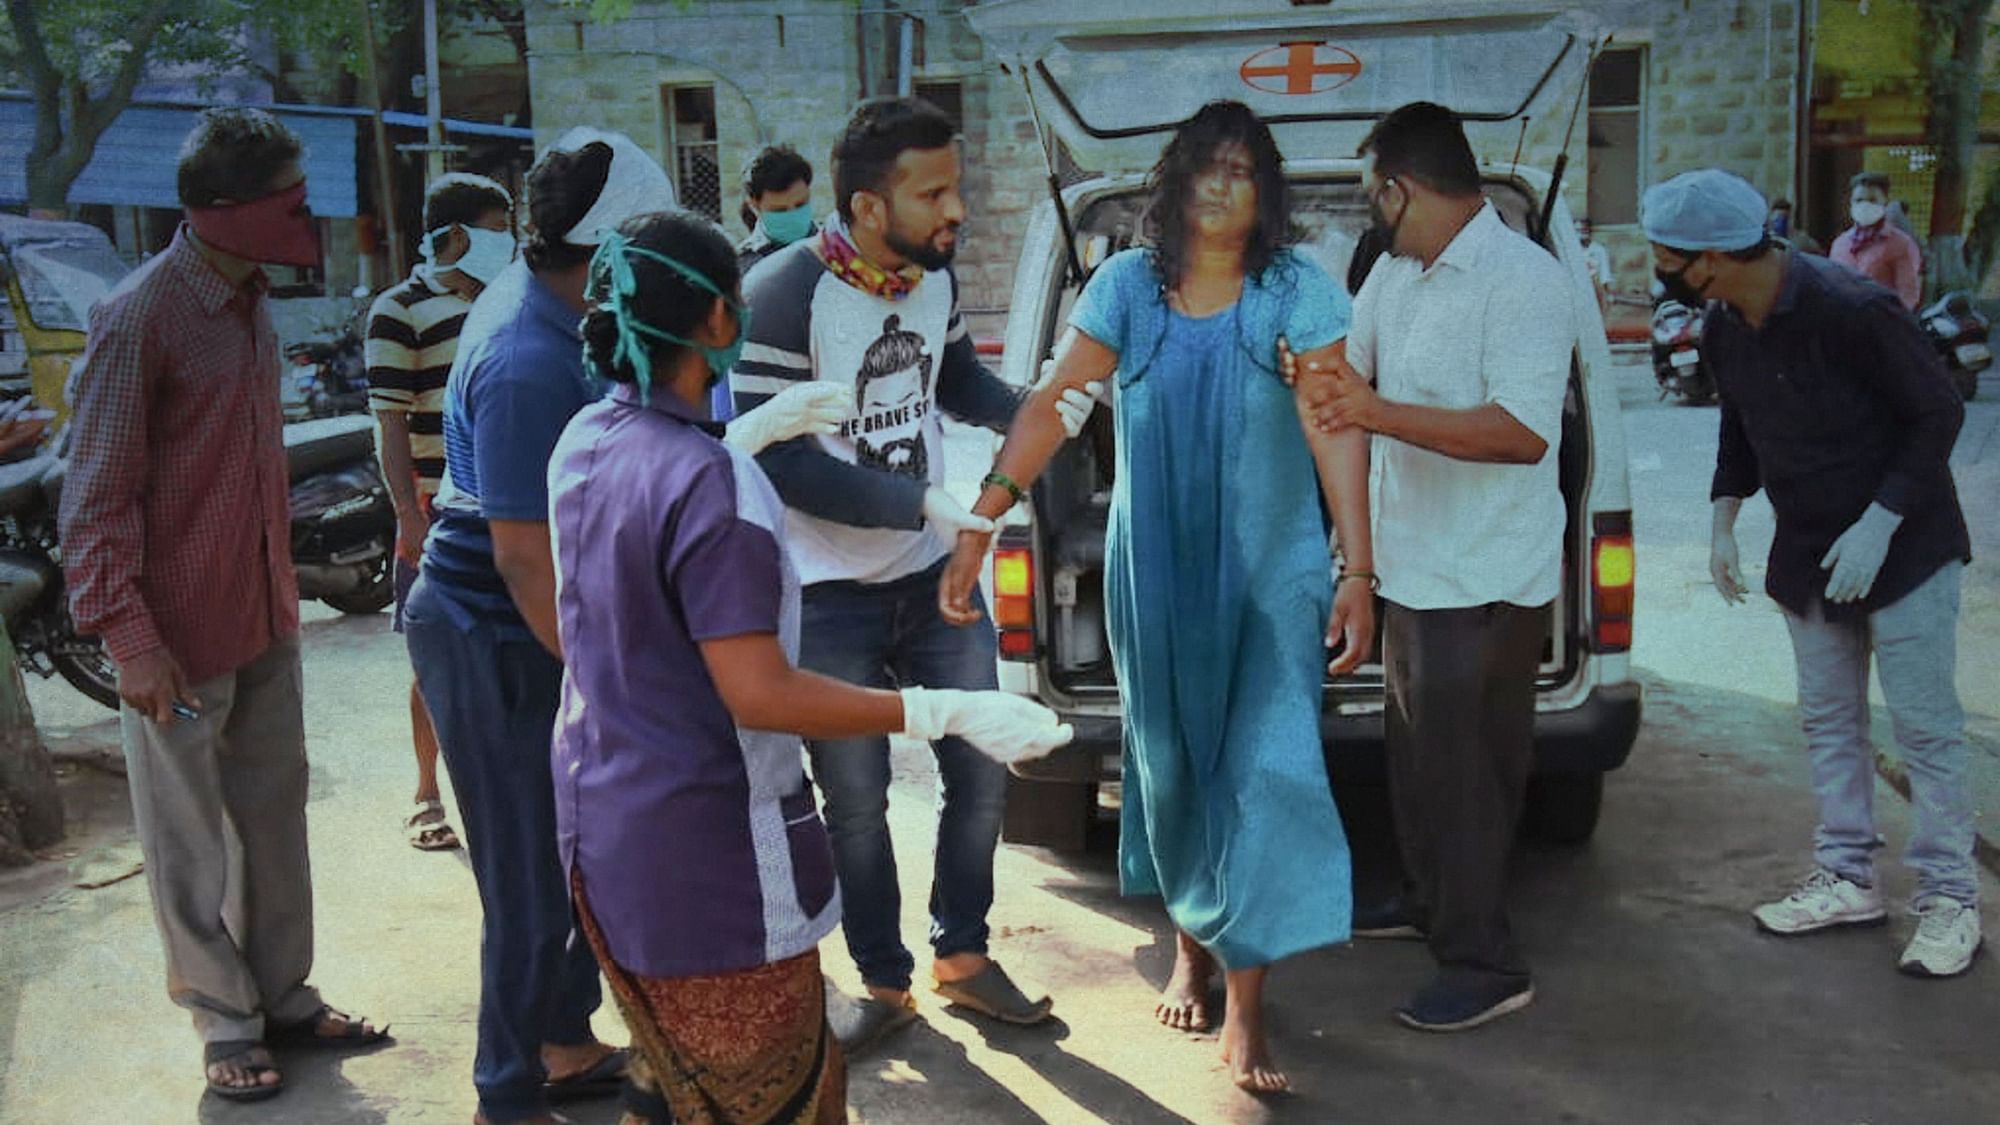 An affected woman being taken for treatment at King George Hospital after the gas leak in RR Venkatapuram village, Visakhapatnam. Image used for representation.